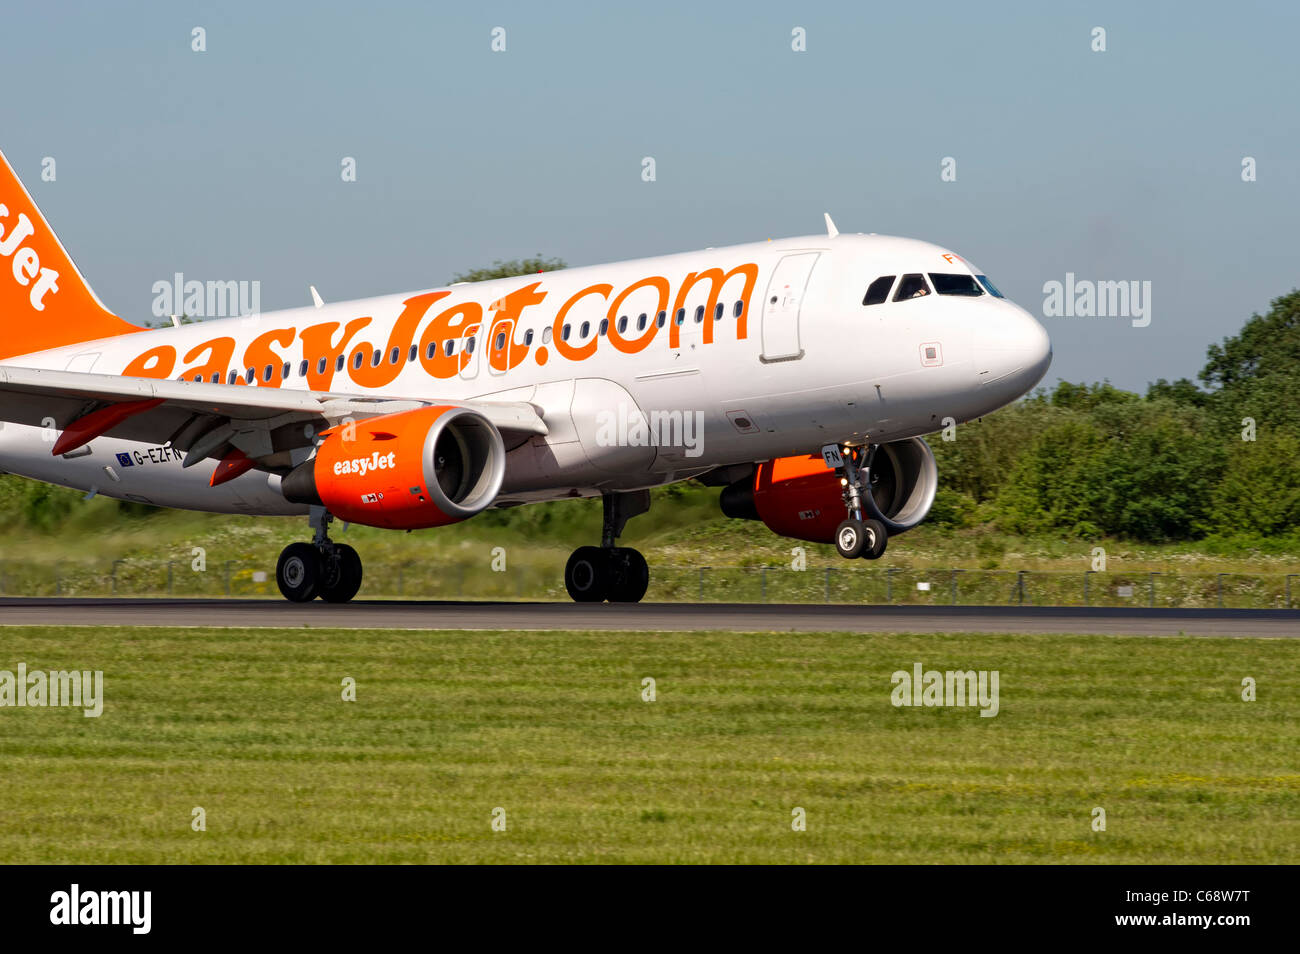 EasyJet aircraft landing at Manchester Airport in England Stock Photo